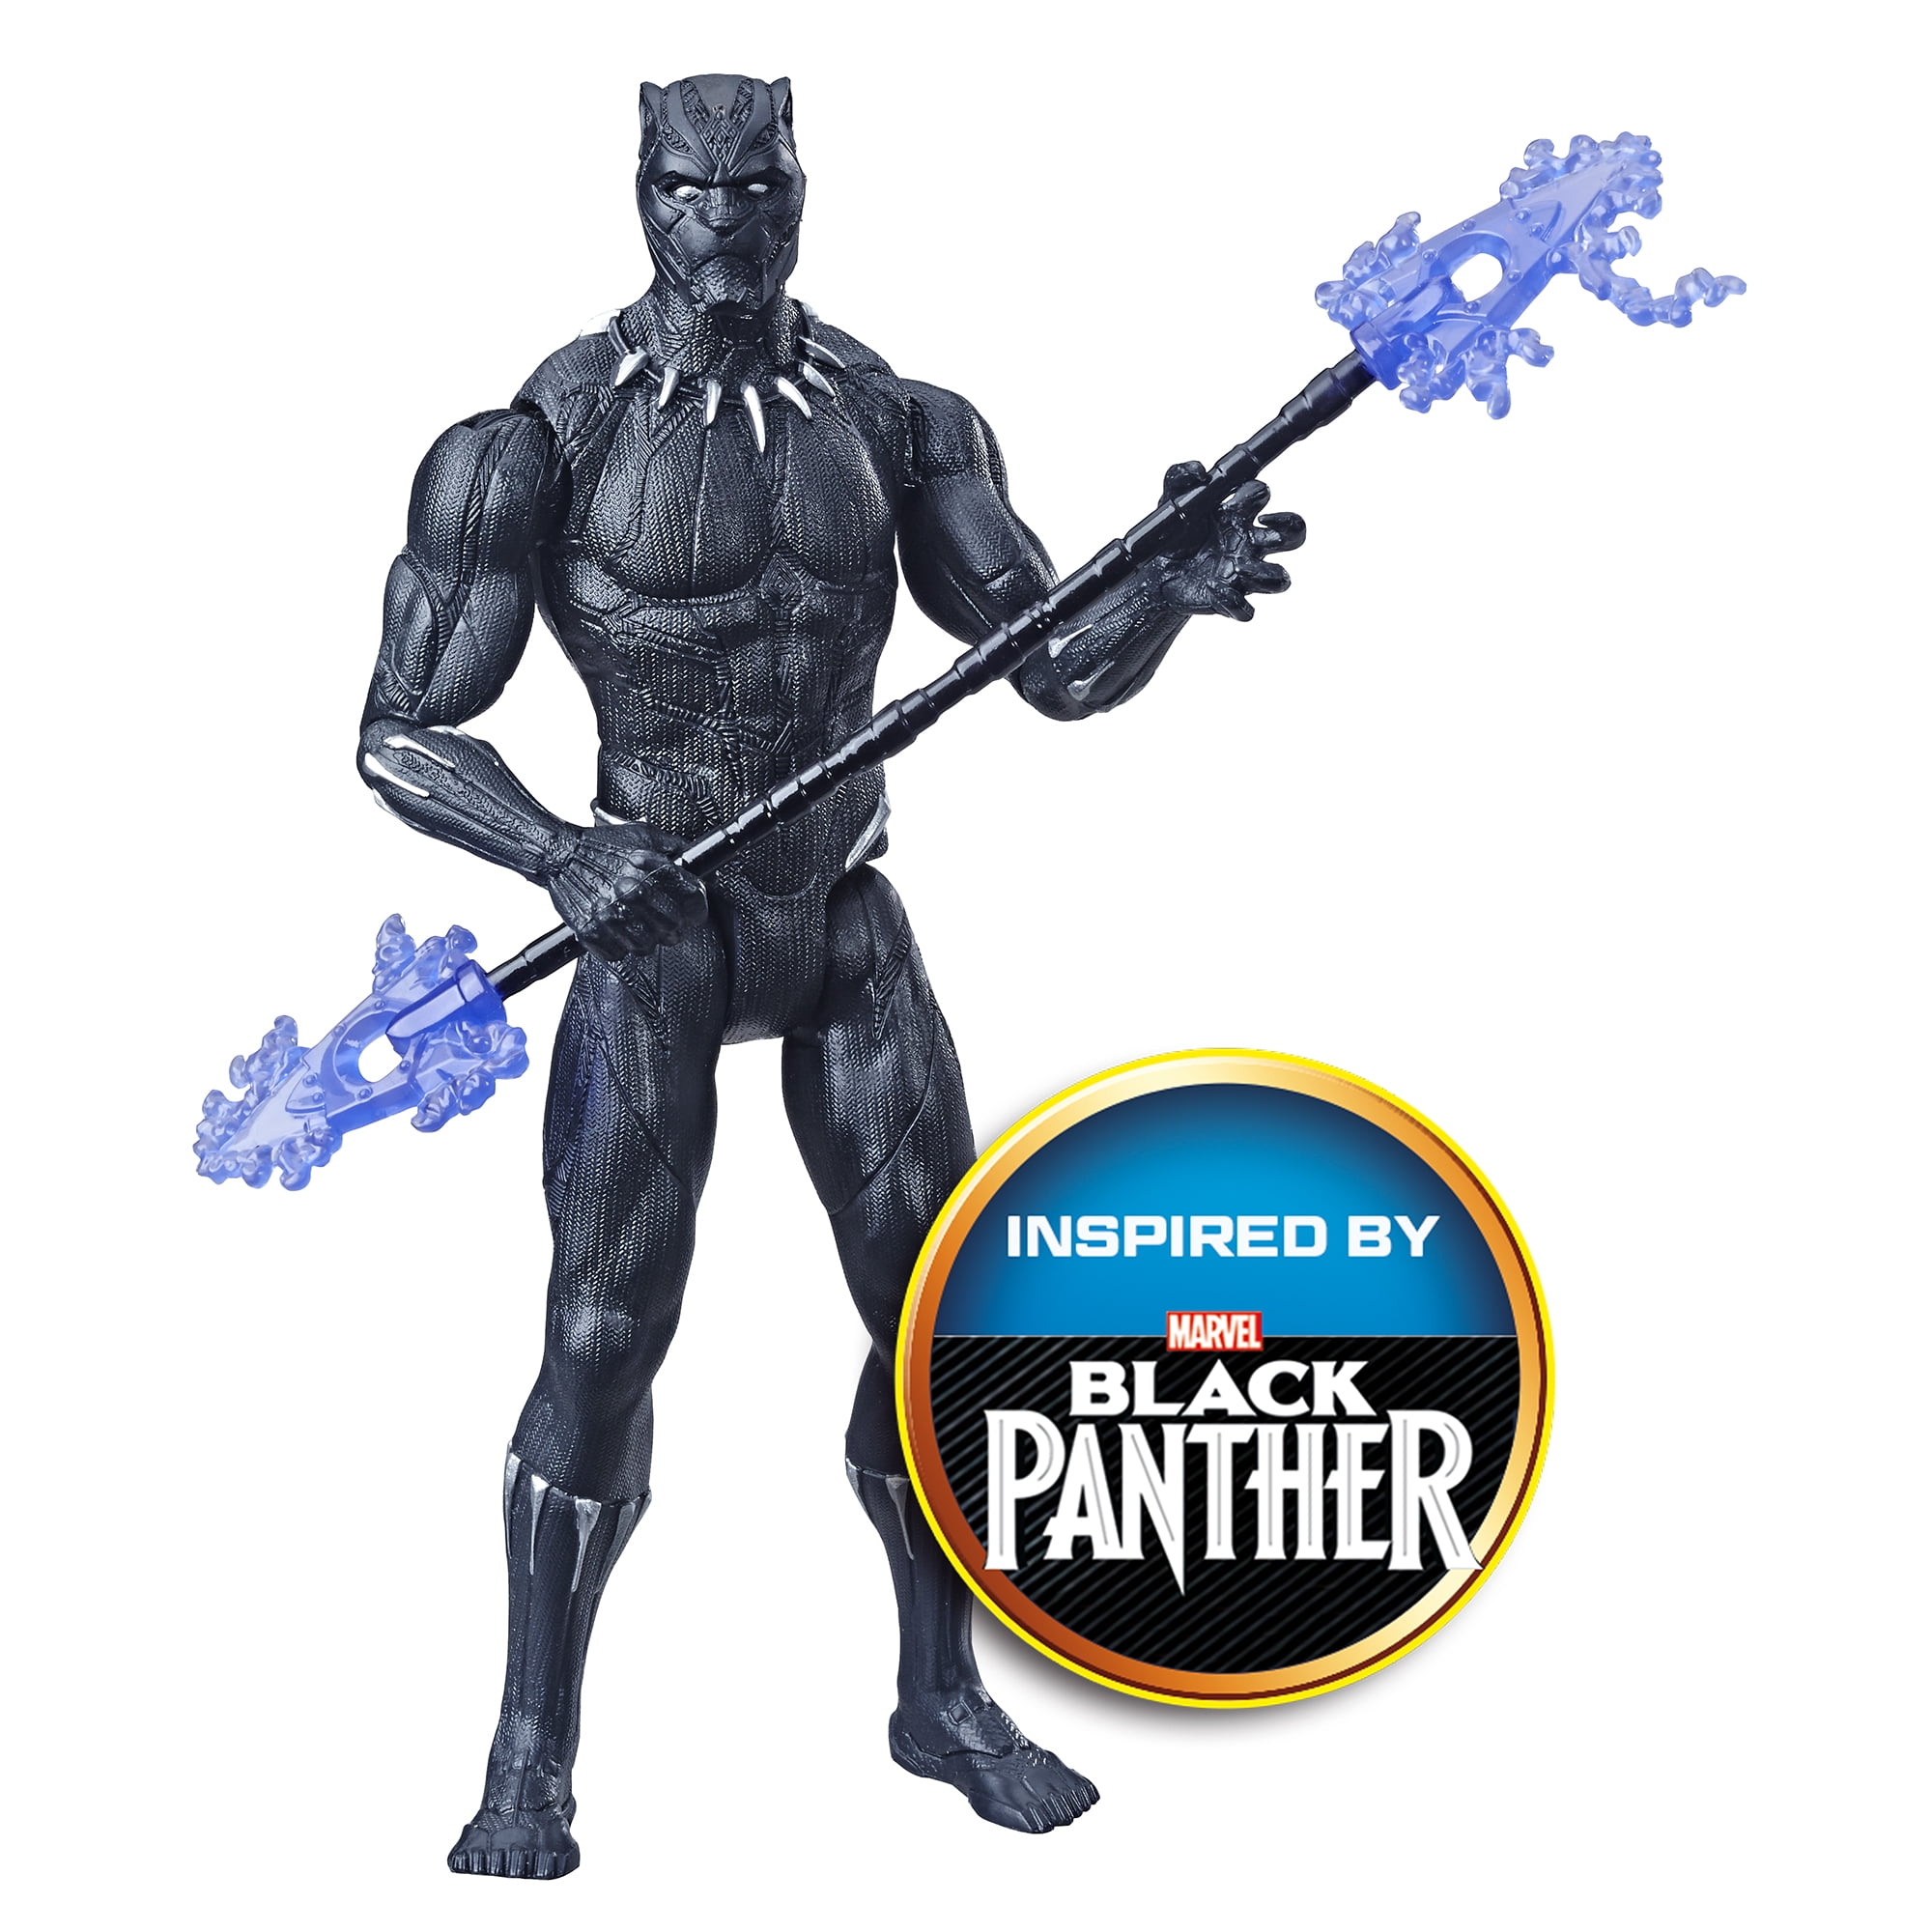 Marvel Black Panther 6" Action Figure Ages 4 & Up Hasbro New In Package Must See 